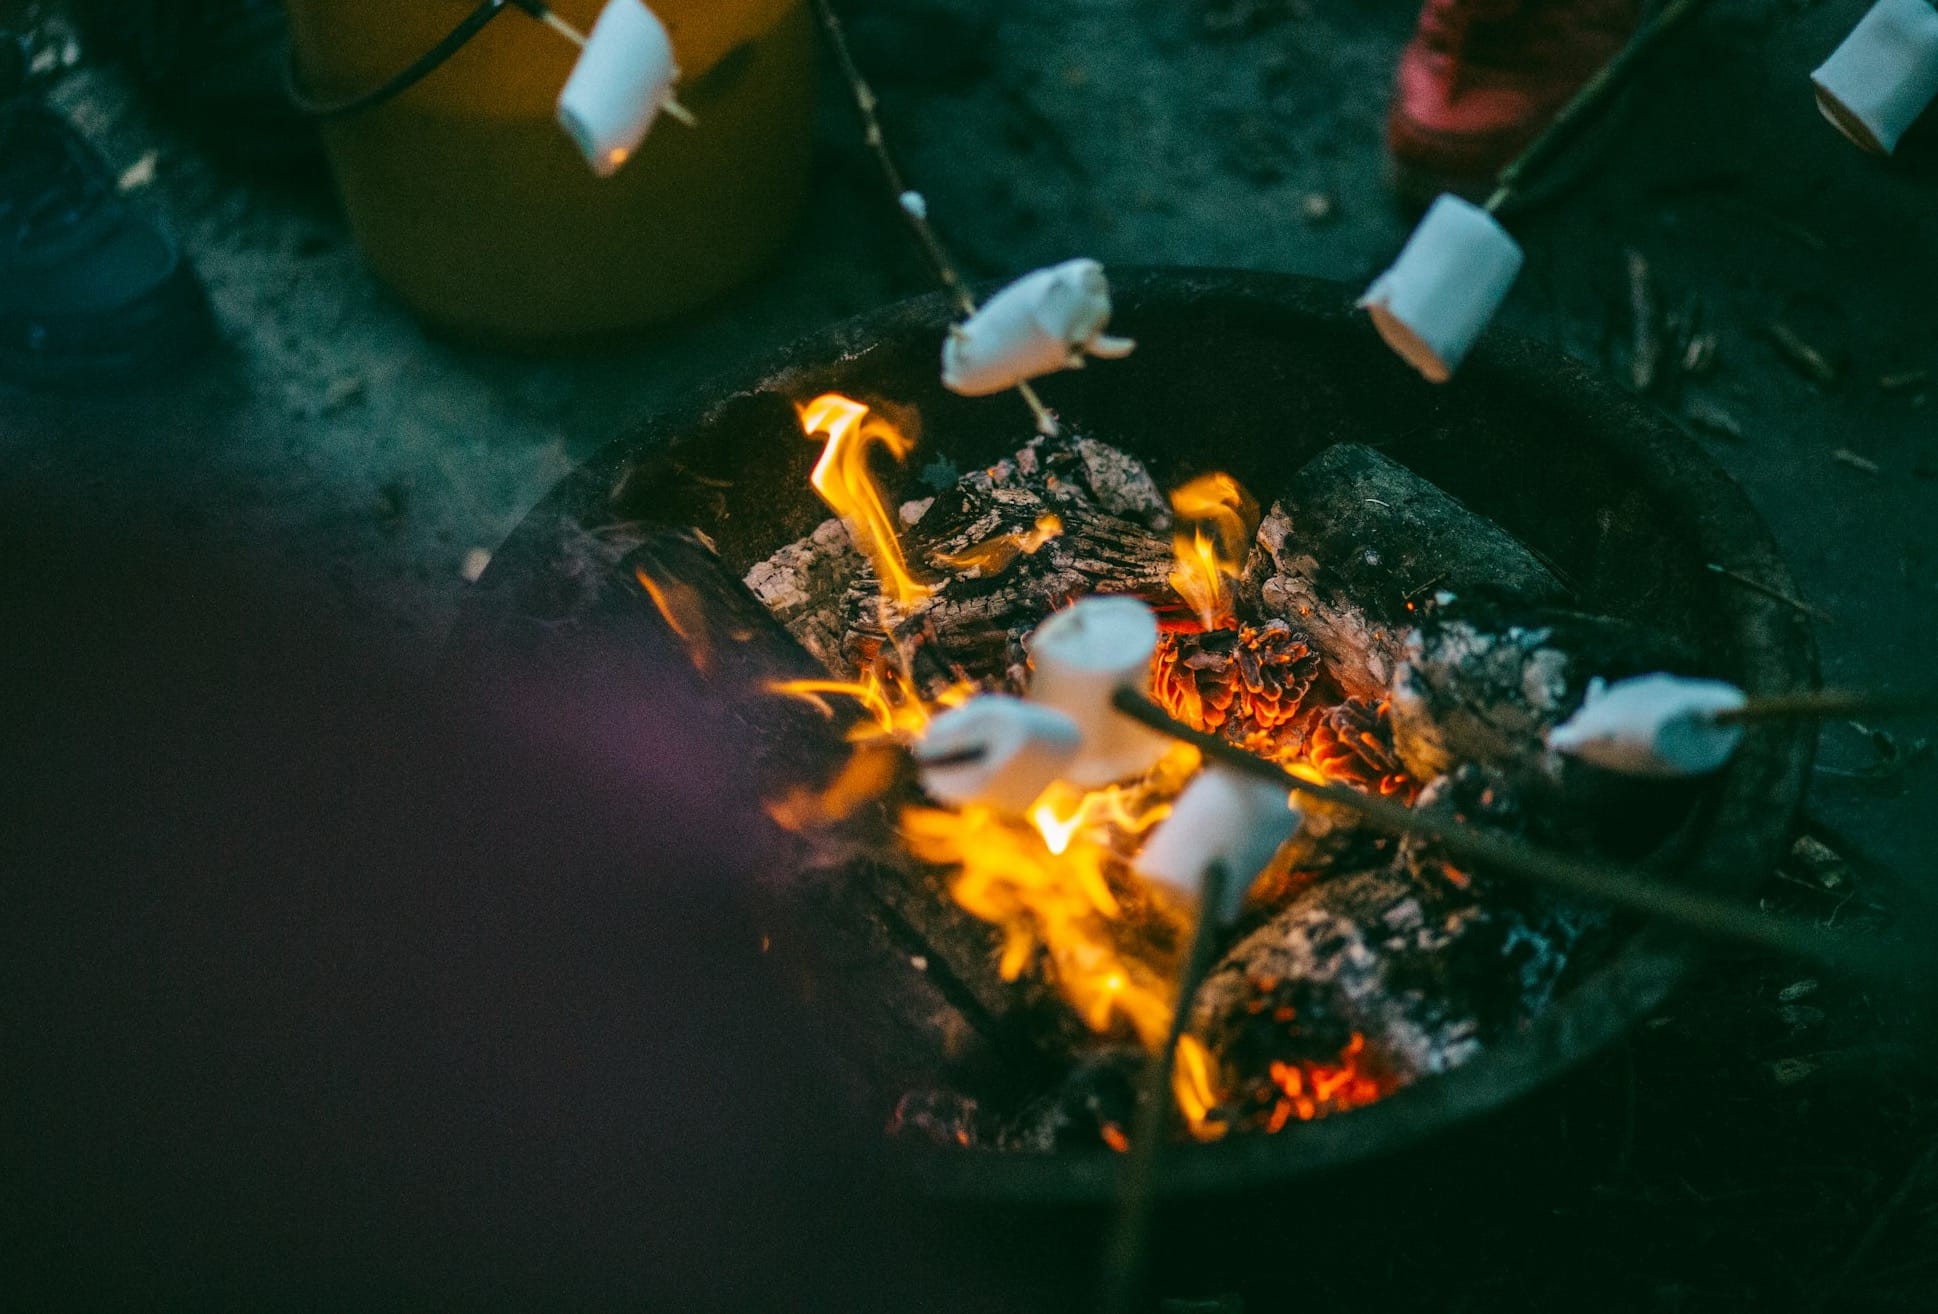 grilling marshmallows on campfire